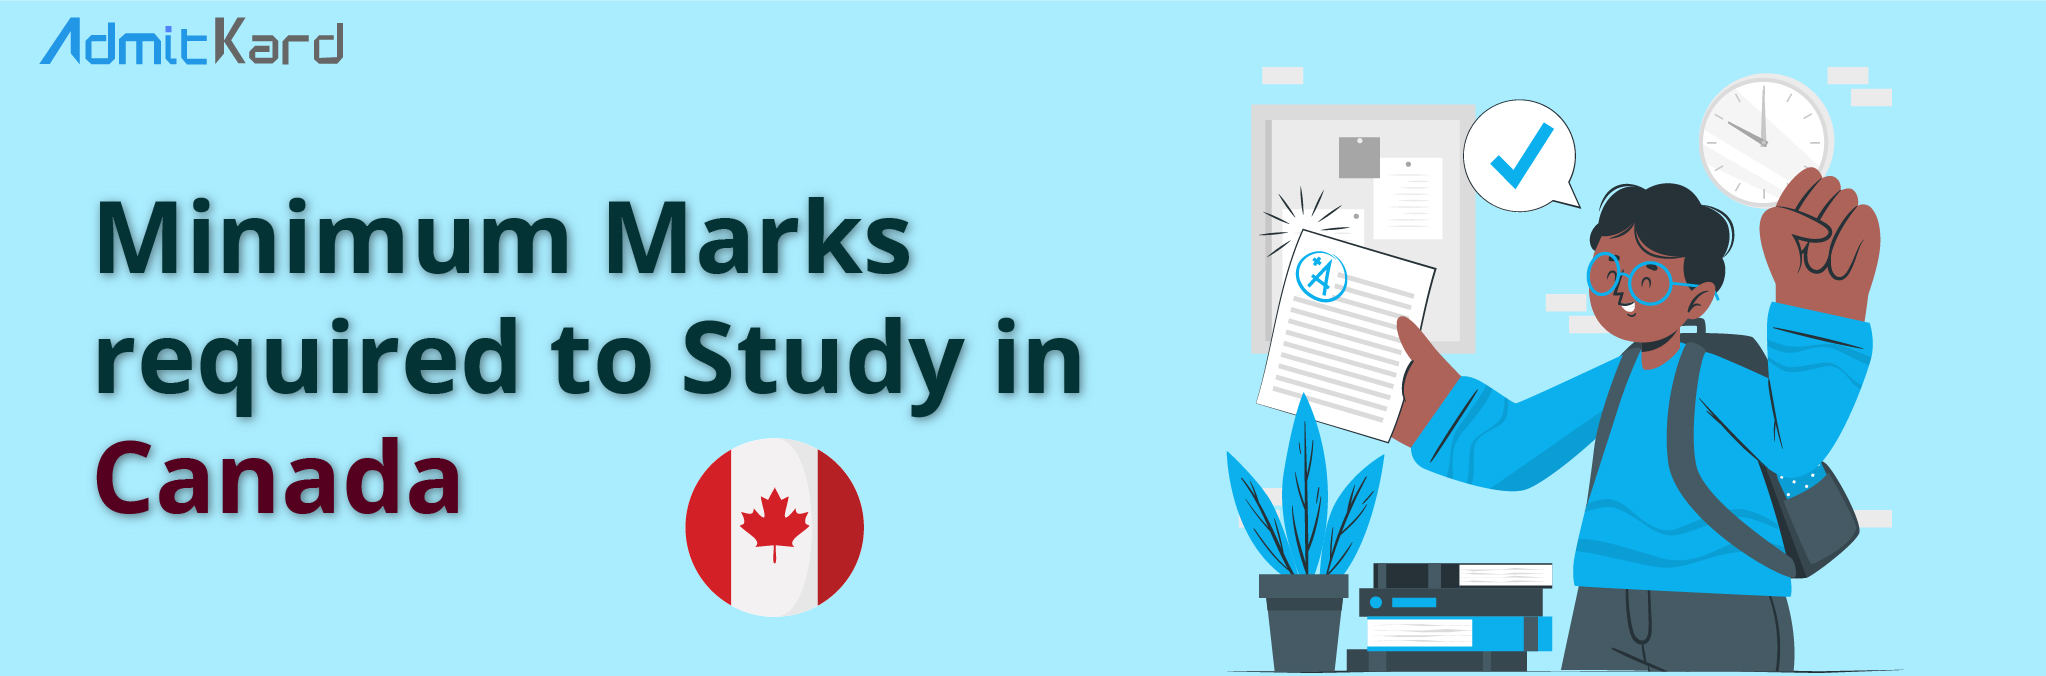 minimum marks required to study in canada